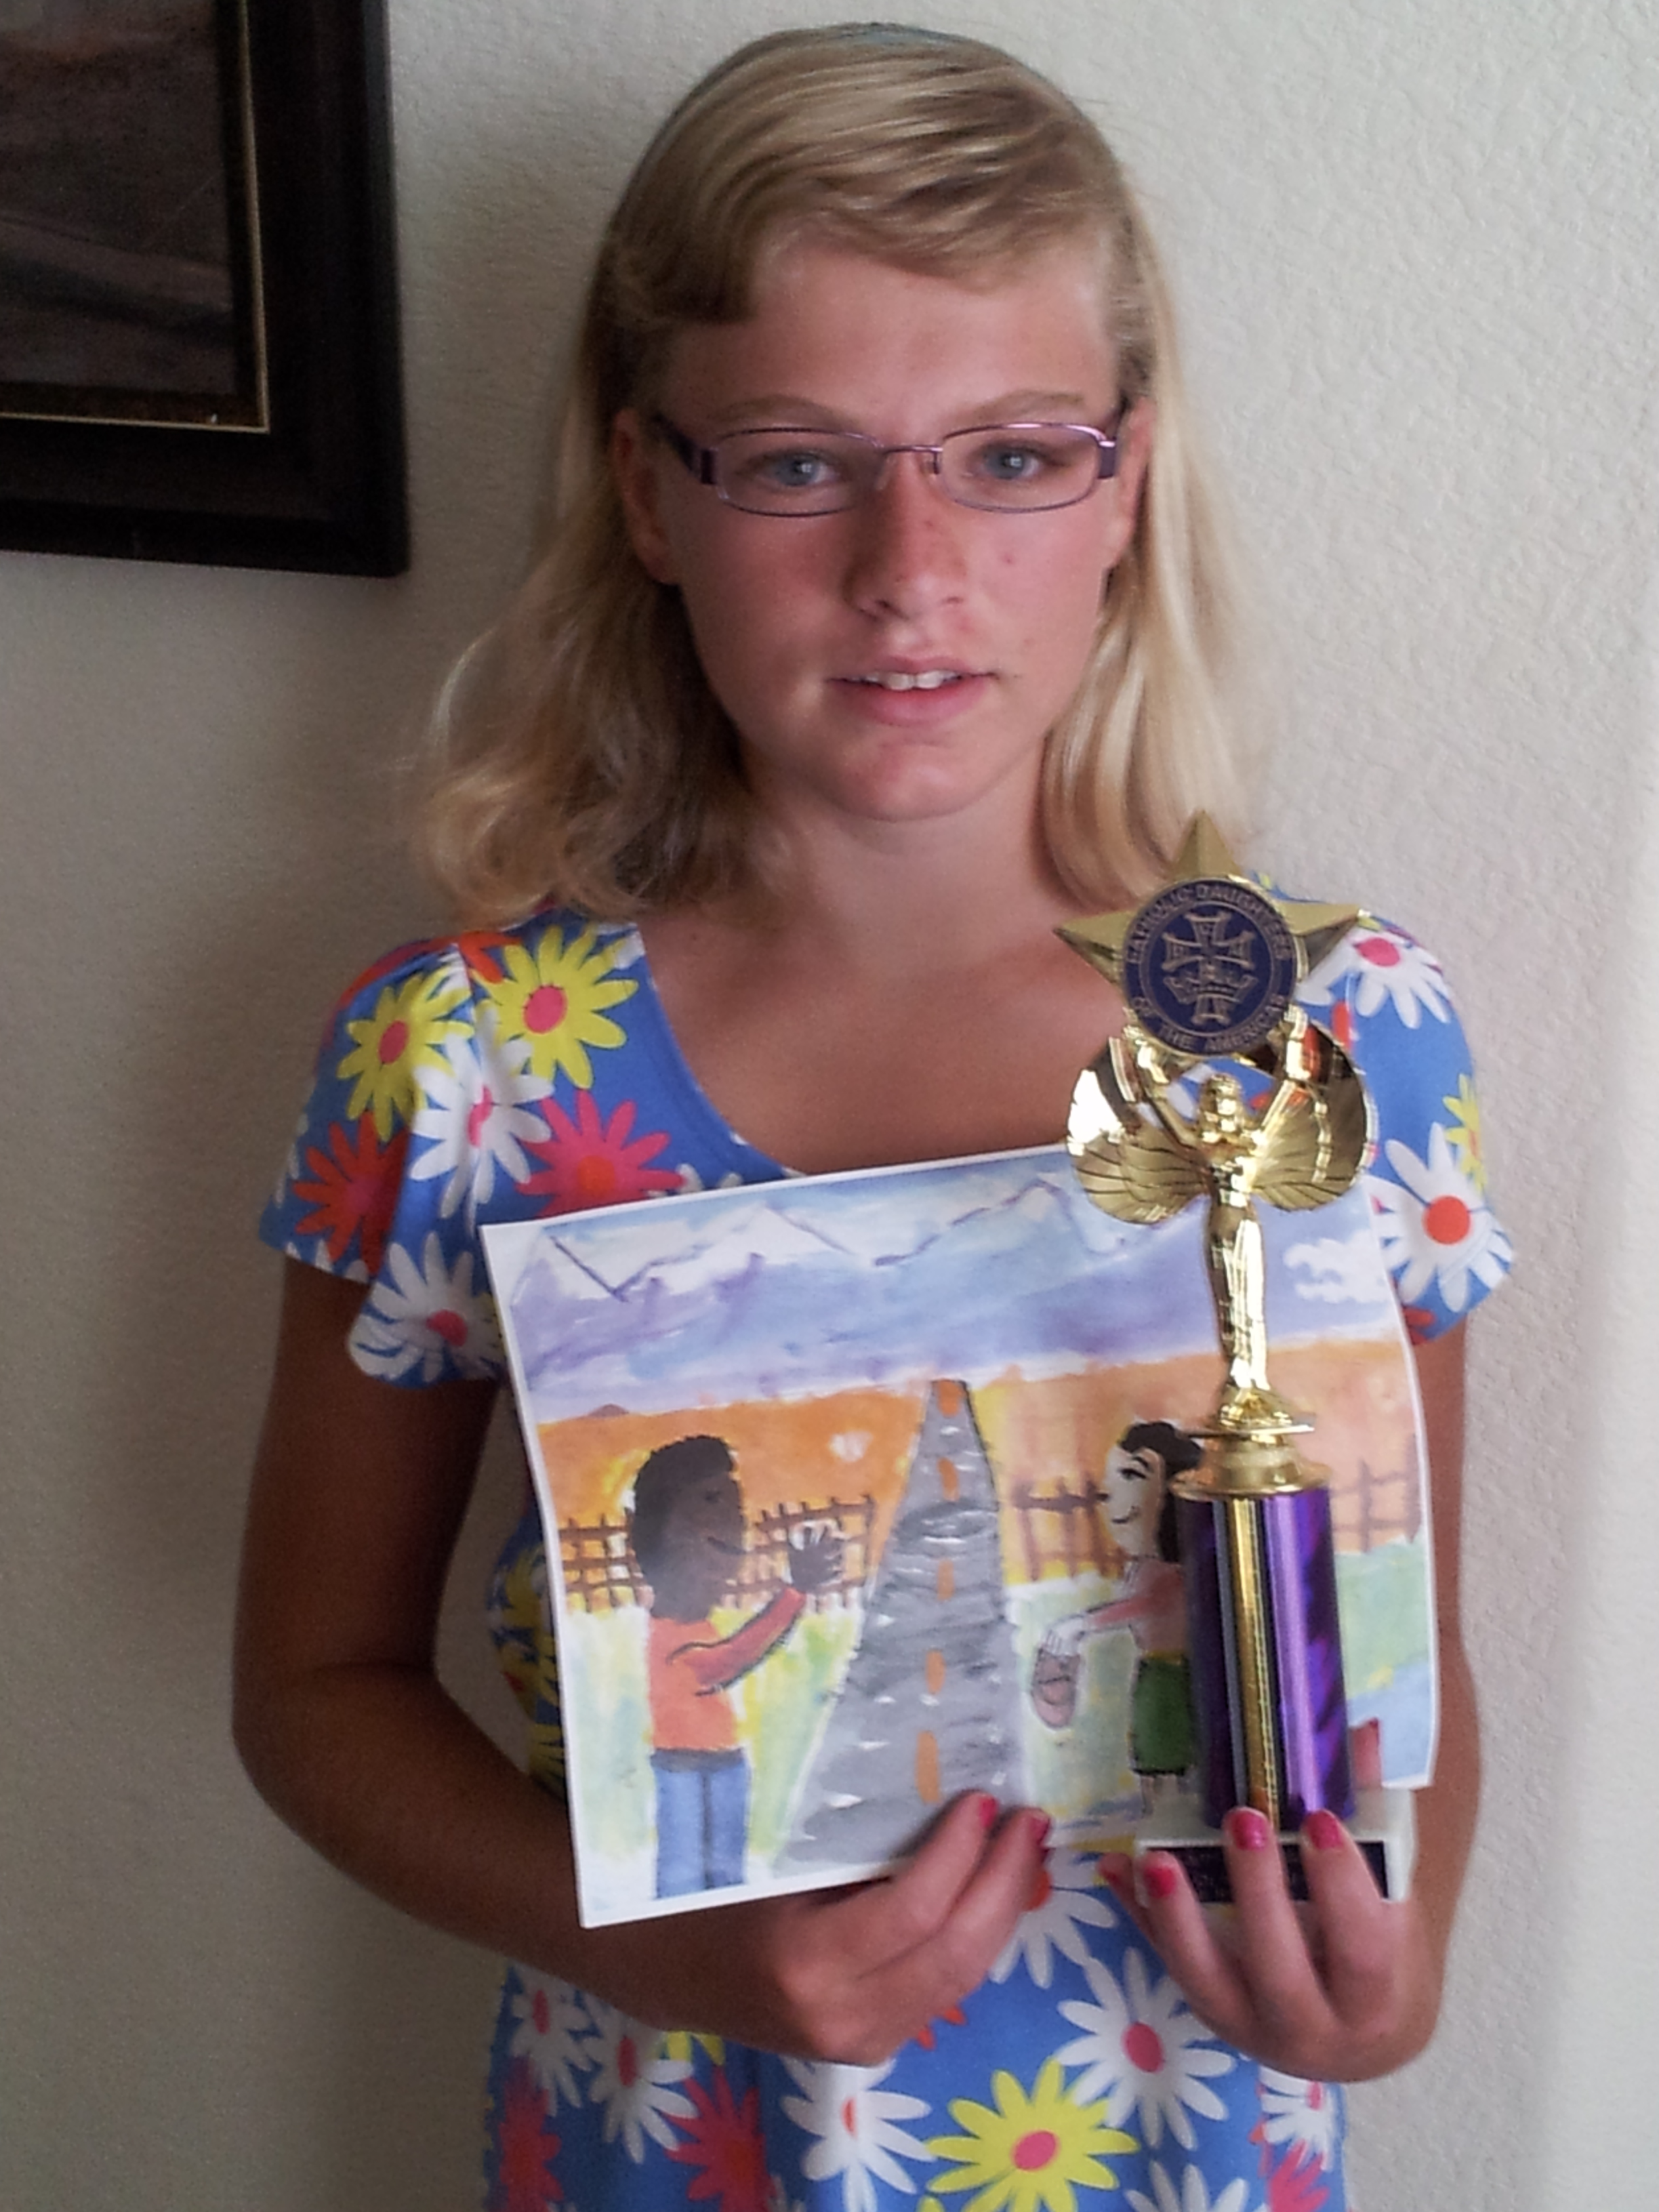 Maria Wins 1st Place in Art Contest